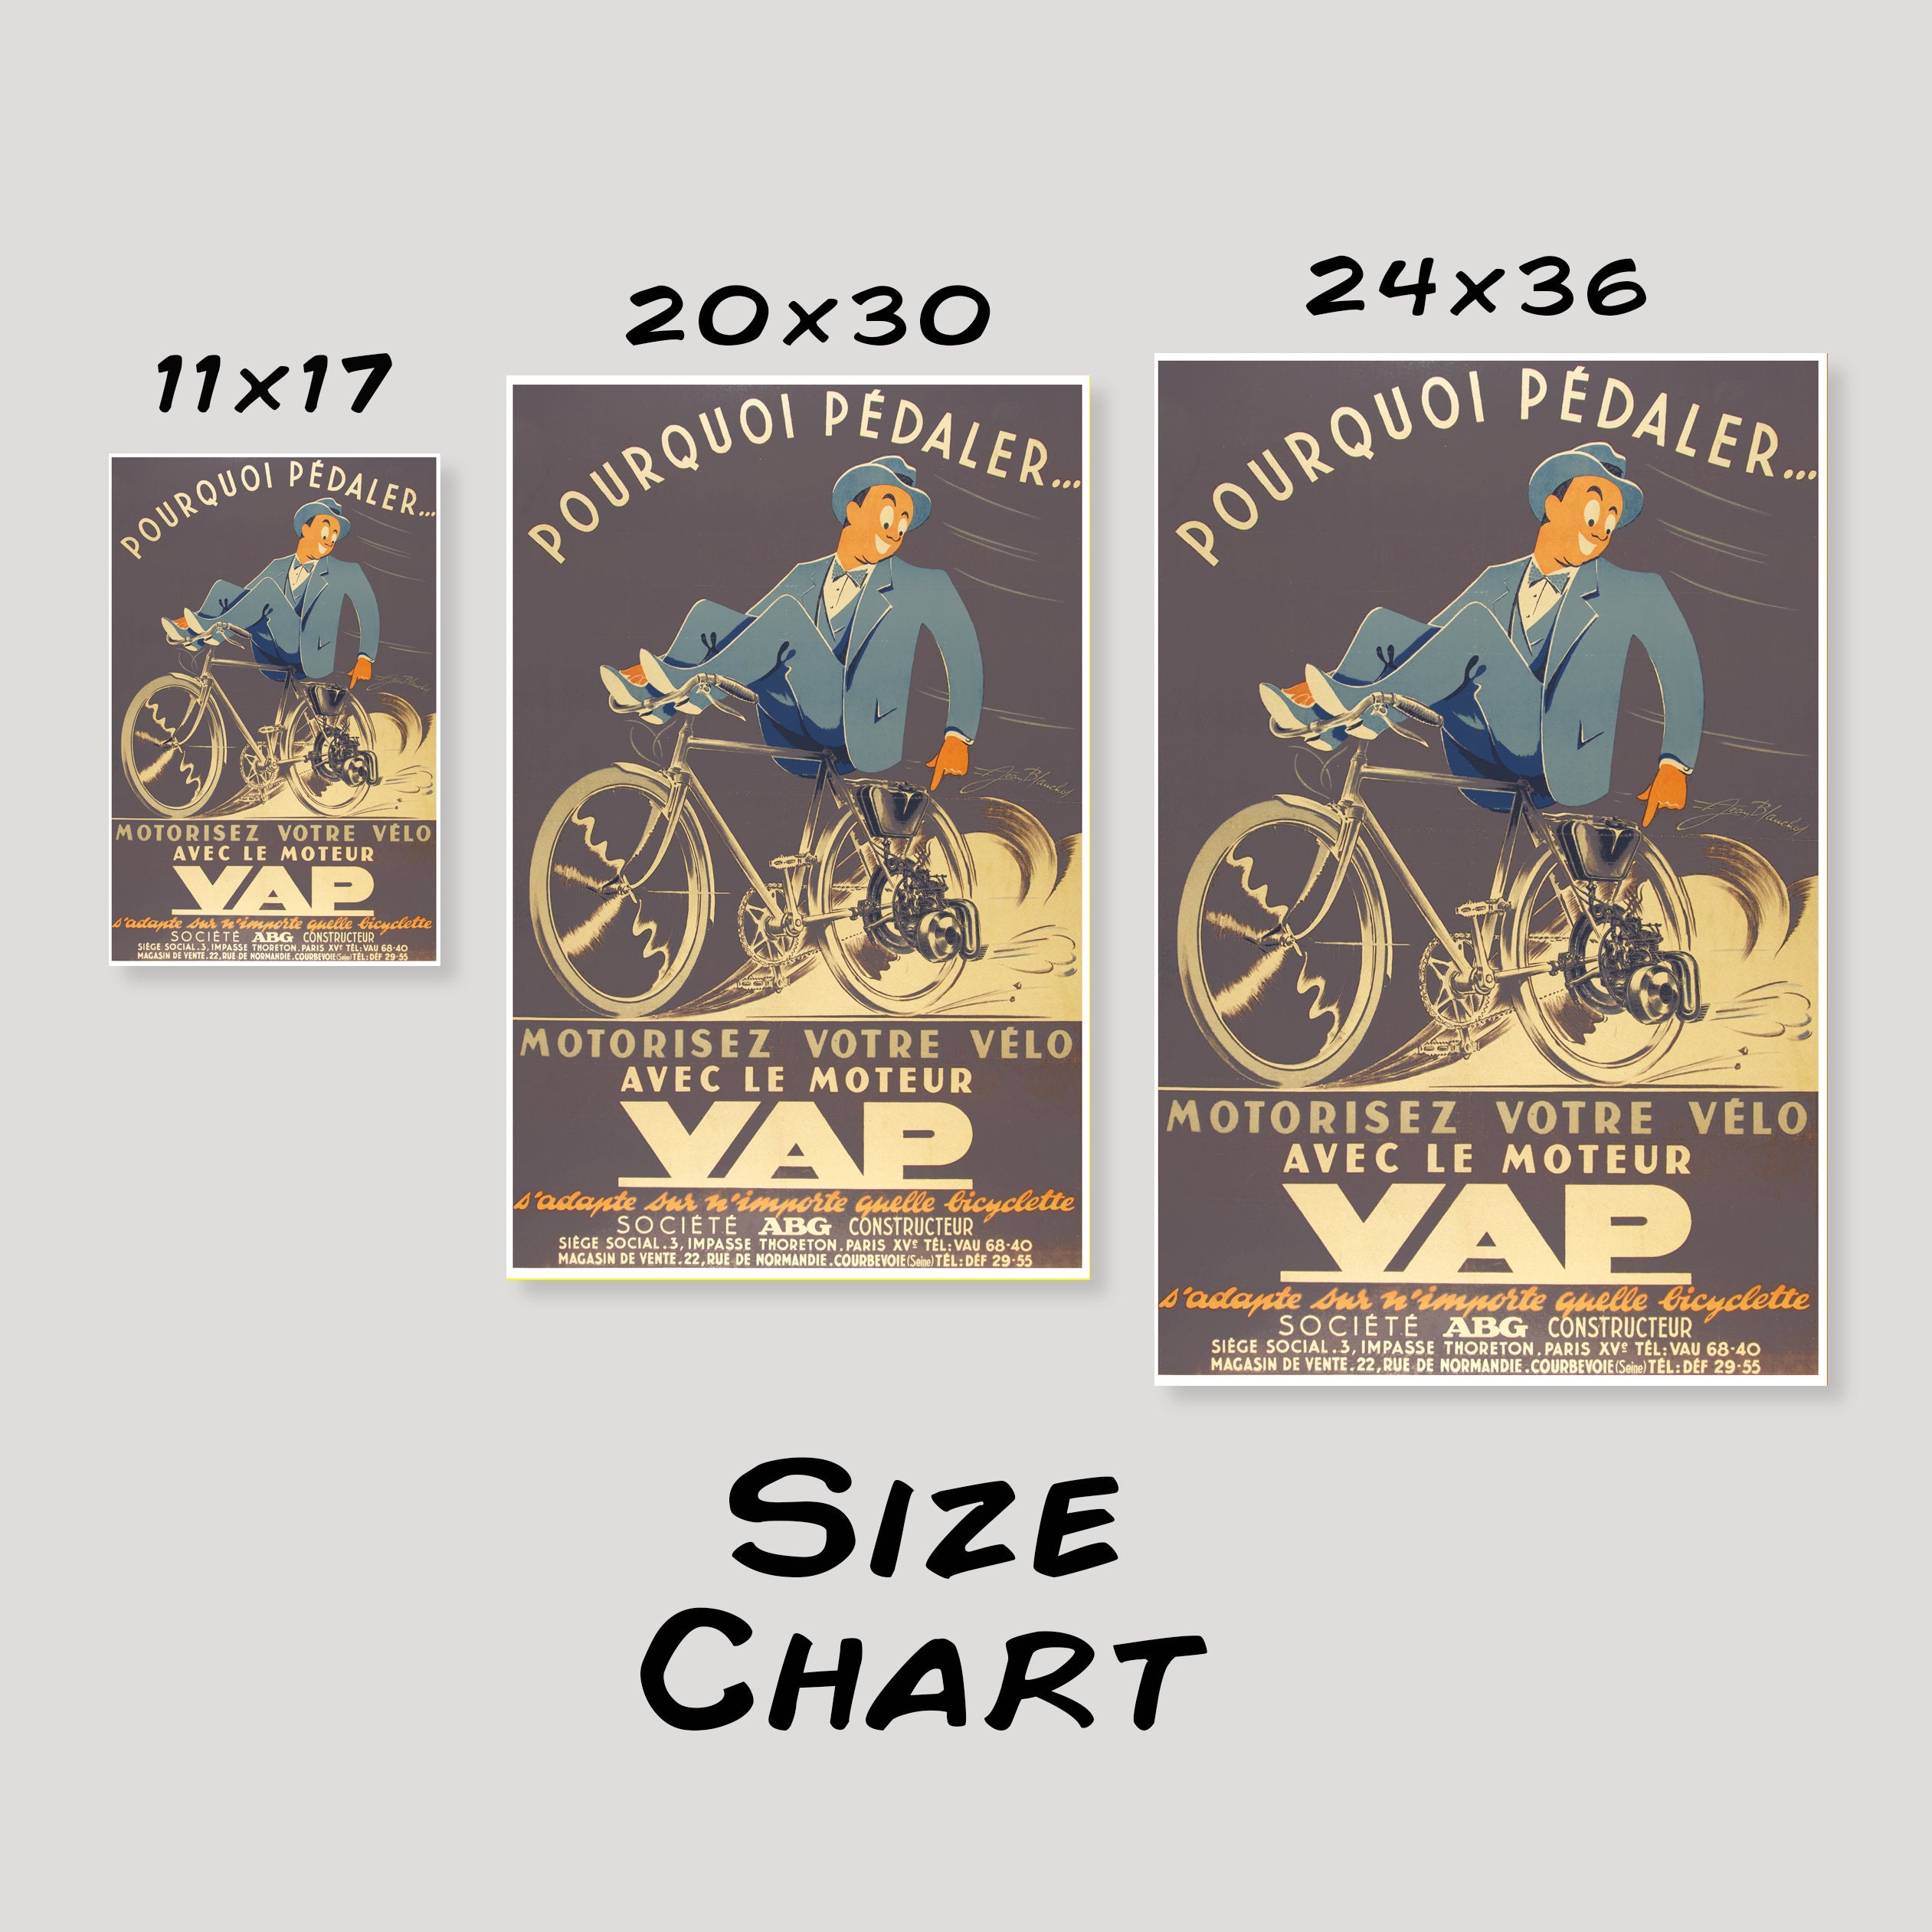 Favor Cycles & Motos 1927 Vintage Bicycle & Motorcycle Poster 24x36 